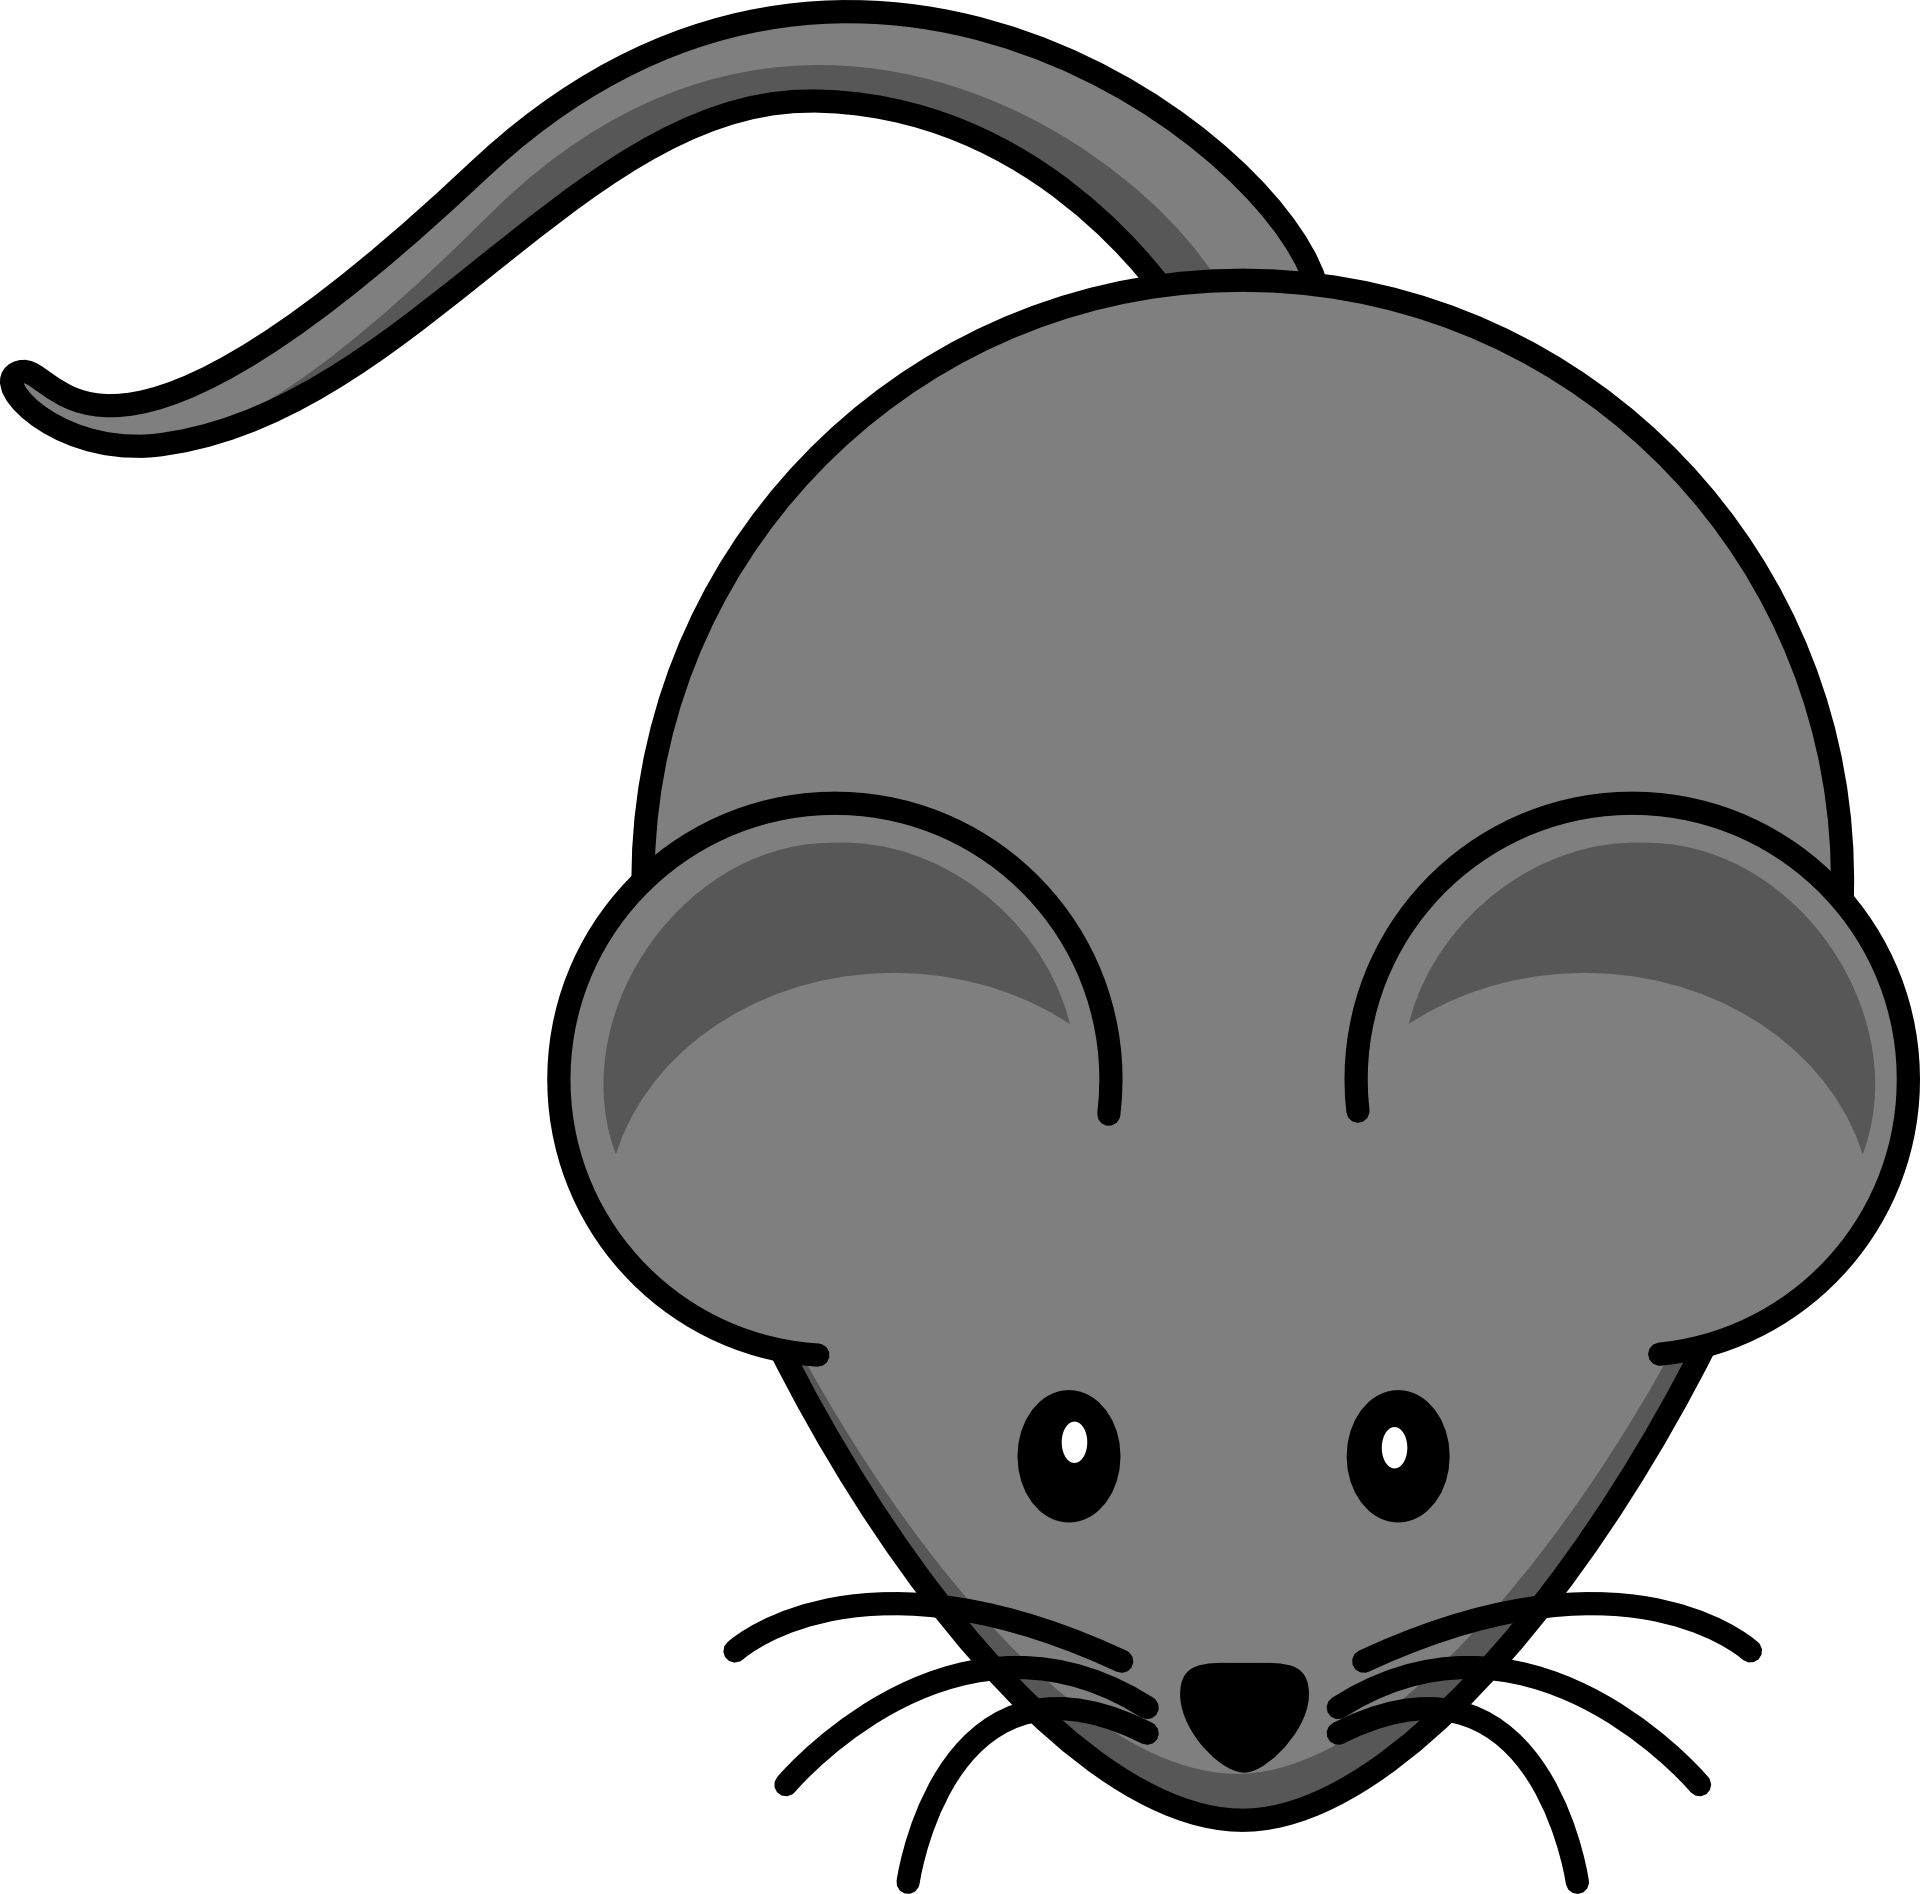 Cute gray mouse.